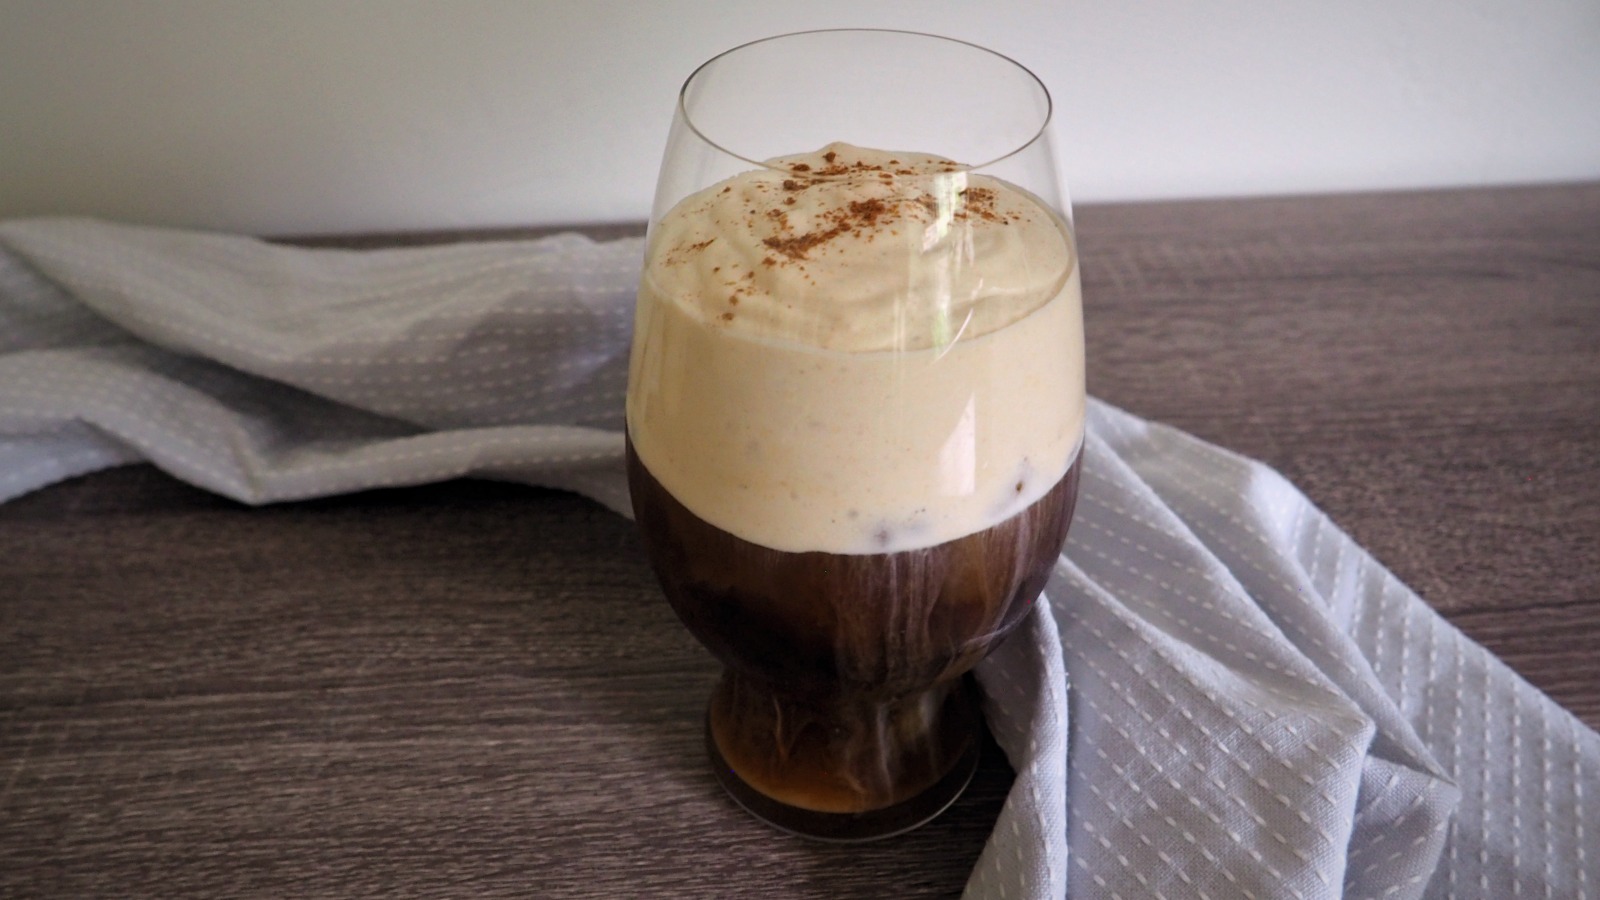 https://www.mashed.com/img/gallery/copycat-starbucks-pumpkin-cream-cold-brew-you-can-make-at-home/l-intro-1599850506.jpg